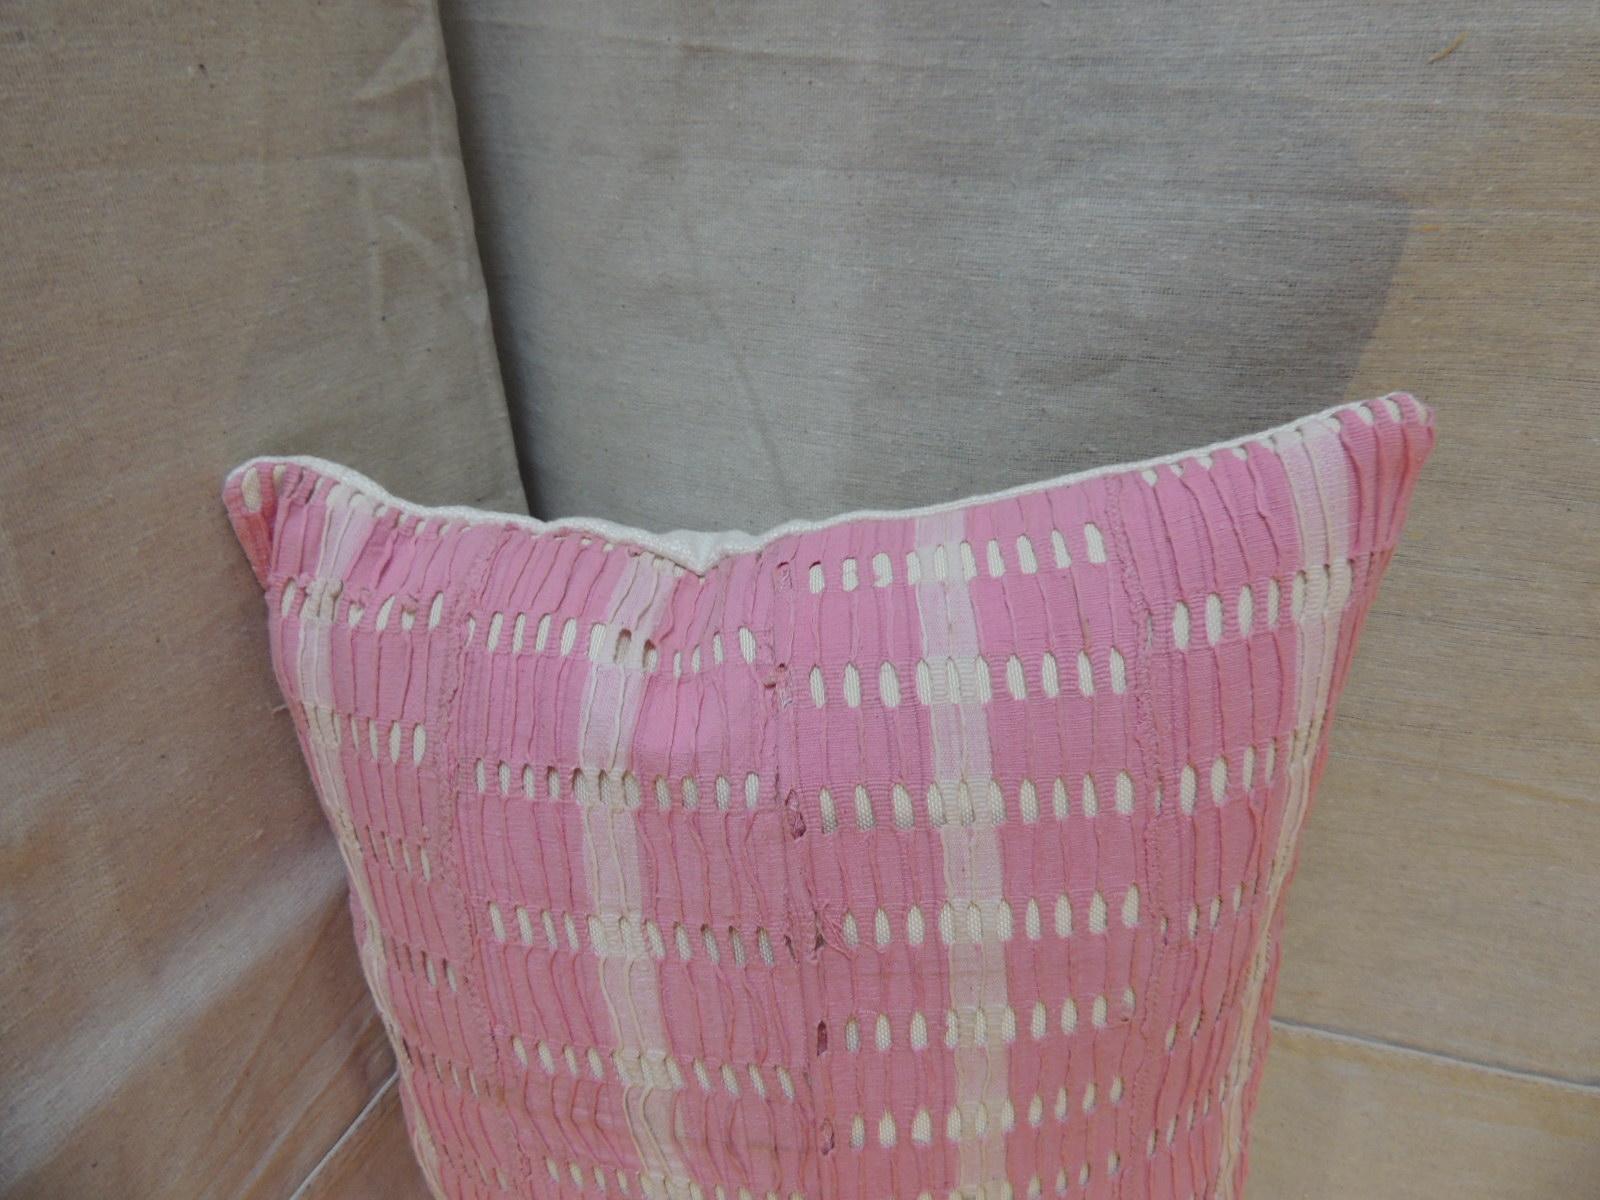 Vintage Yoruba lace weave hot pink African bolster decorative pillow
with soft grey color cotton backing.
Decorative pillow handcrafted and designed in the USA.
Closure by stitch (no zipper closure) with custom made pillow insert.
Size: 15